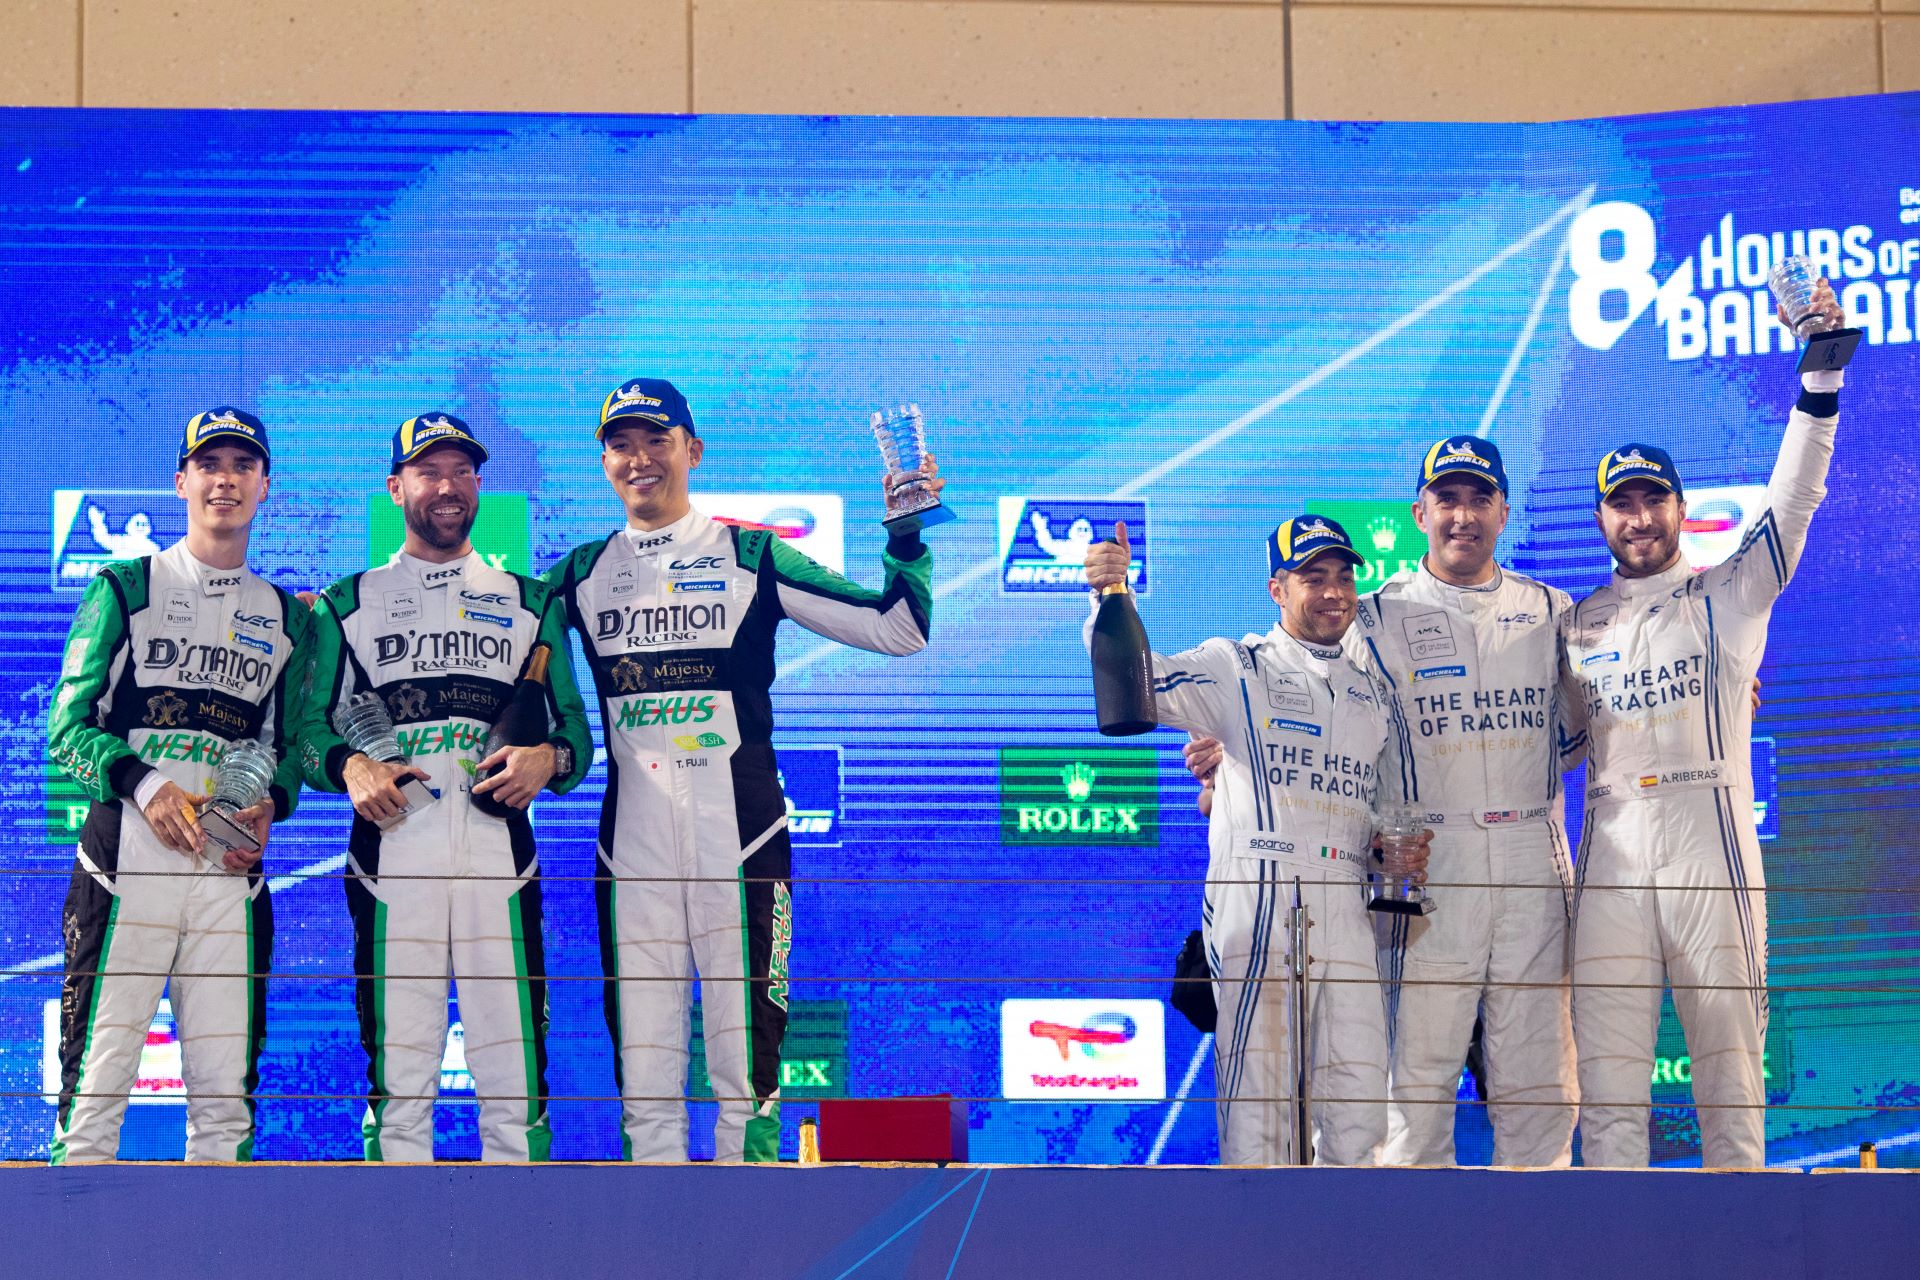 Vantage brings curtain down on GTE era with double podium finish in Bahrain FIA WEC finale